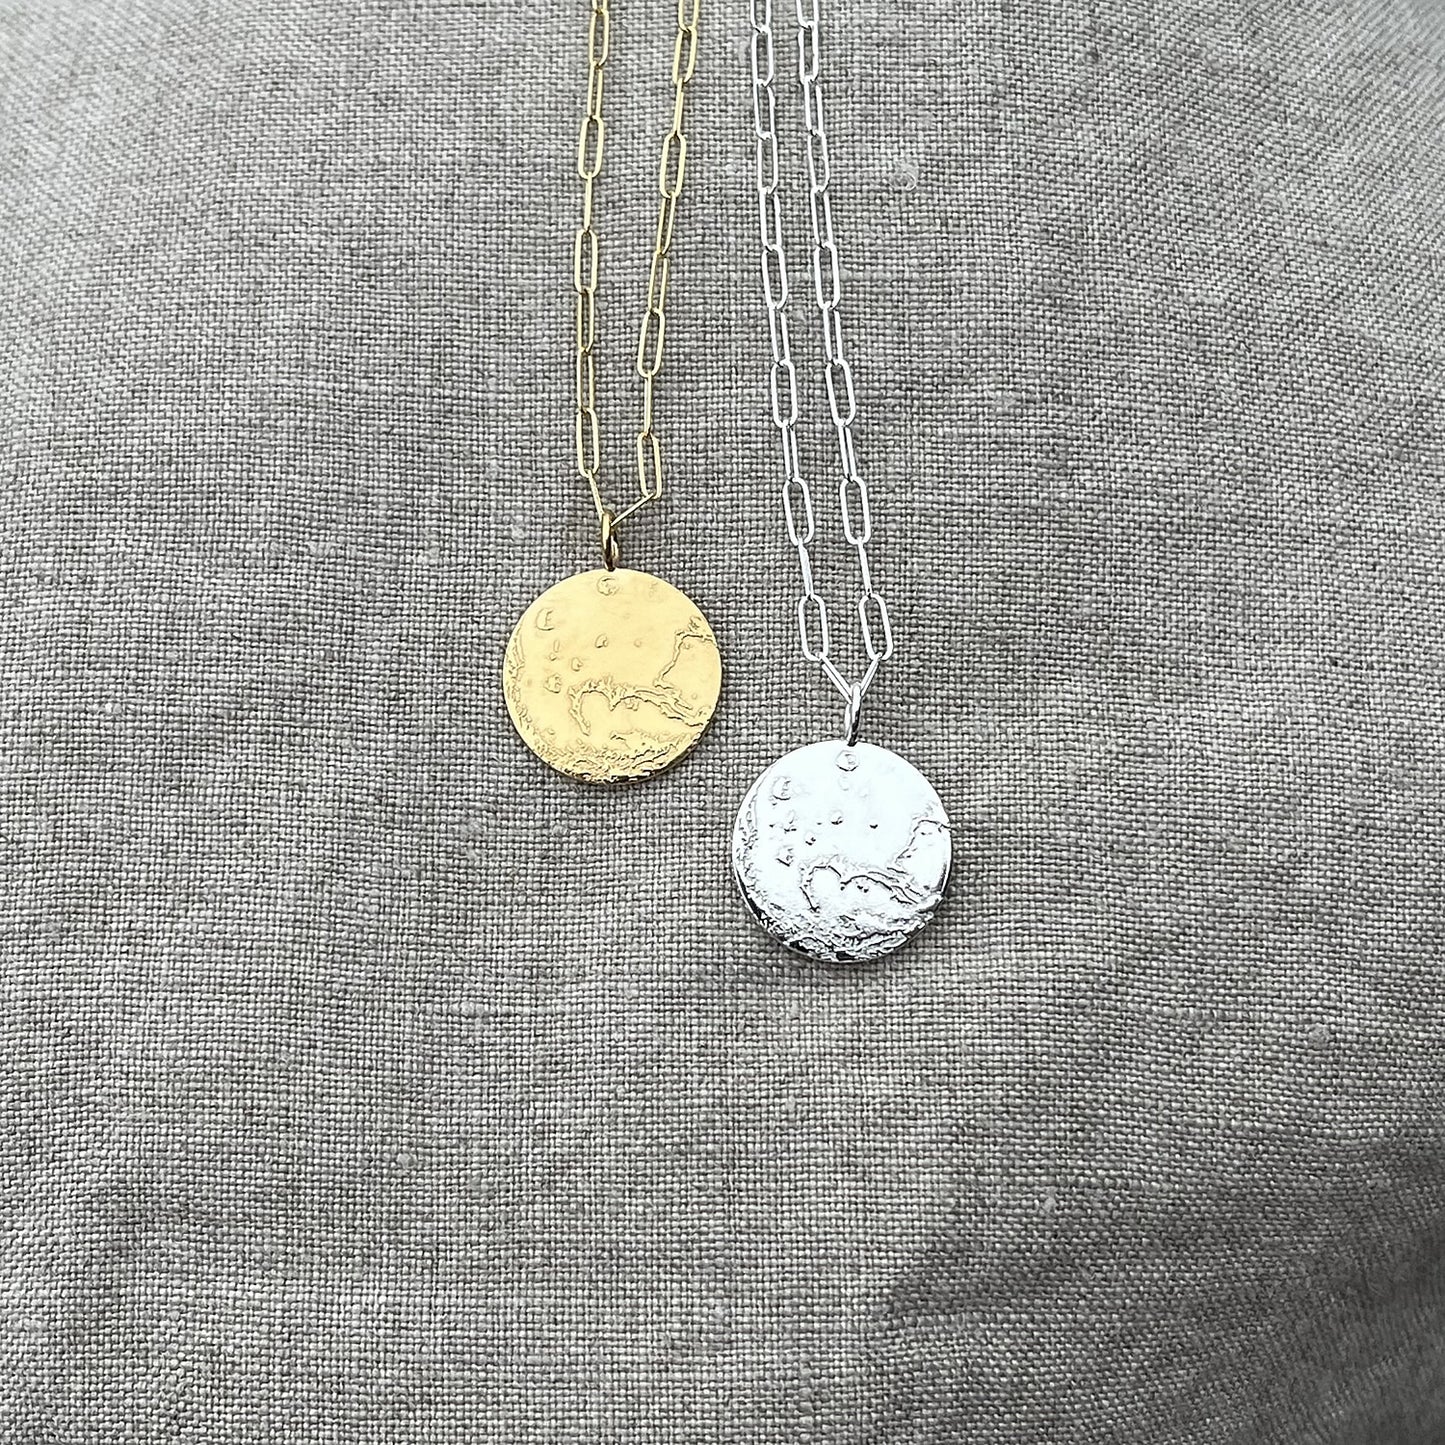 Mars Necklace in Sterling Silver or Gold Vermeil – Jaci Riley Jewelry